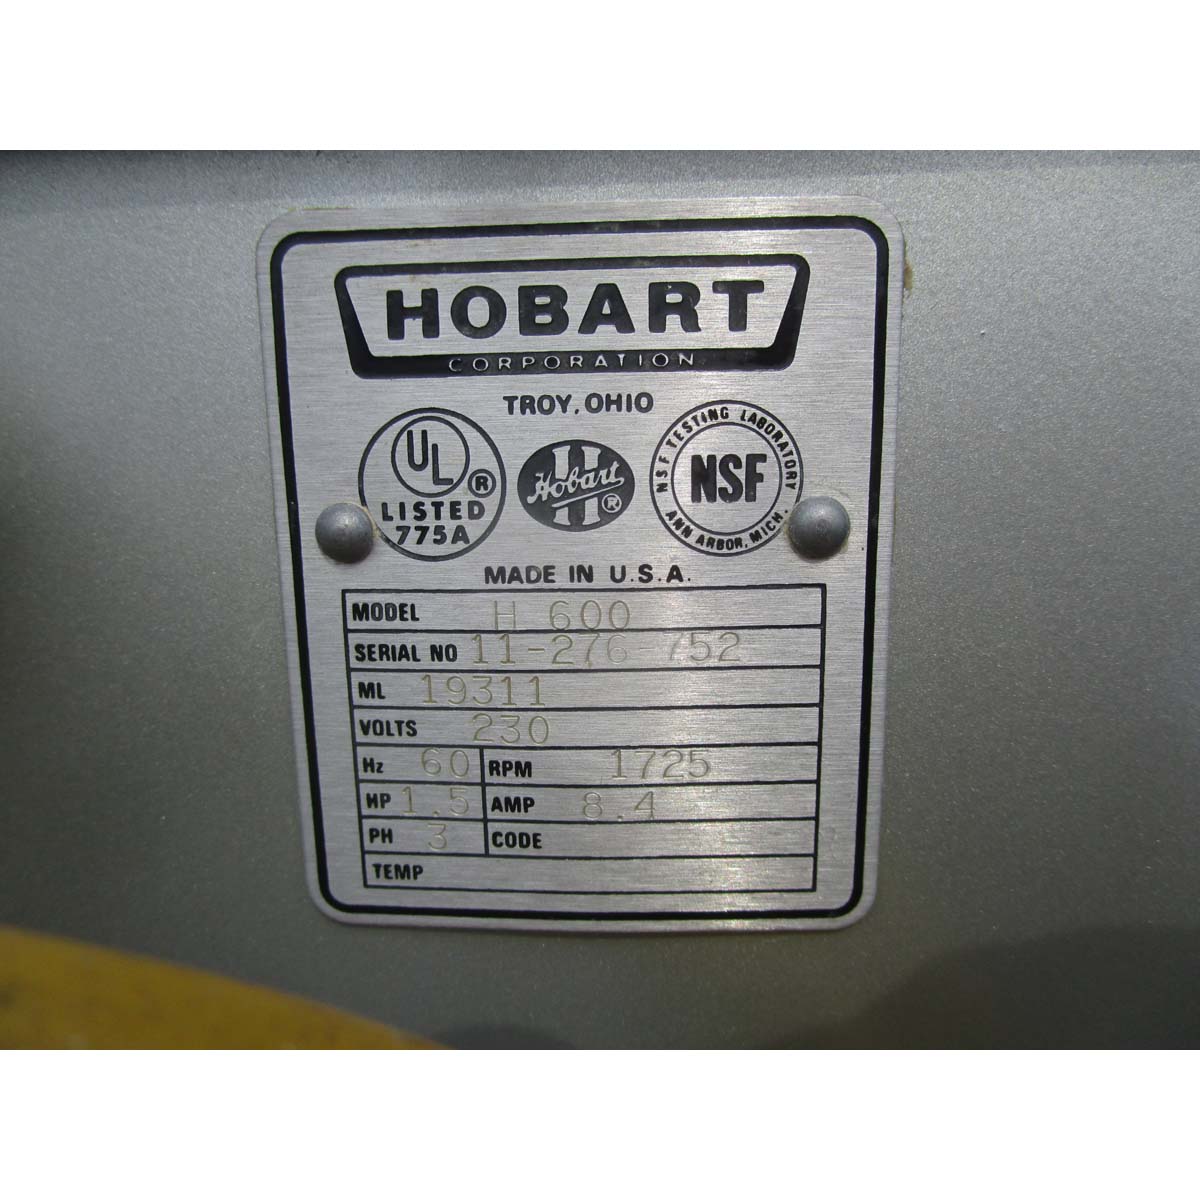 Hobart H600 60 Quart Mixer 'With Power Bowl Lift,' Used Excellent Condition image 5